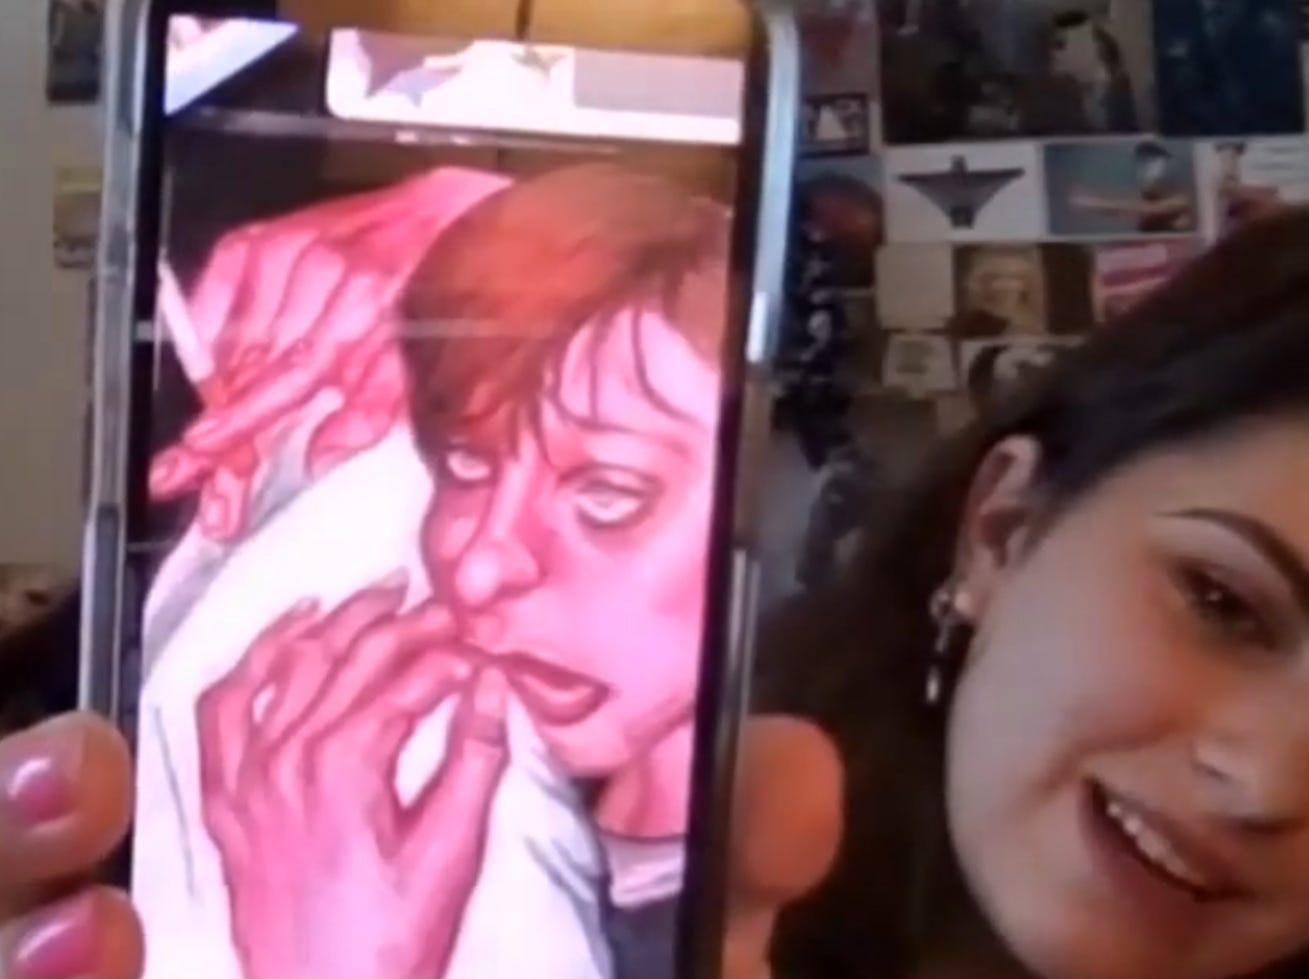 Screenshot of Bella holding a phone with a drawing of a young, inebriated-looking woman leaning on a cushion and holding a cigarette